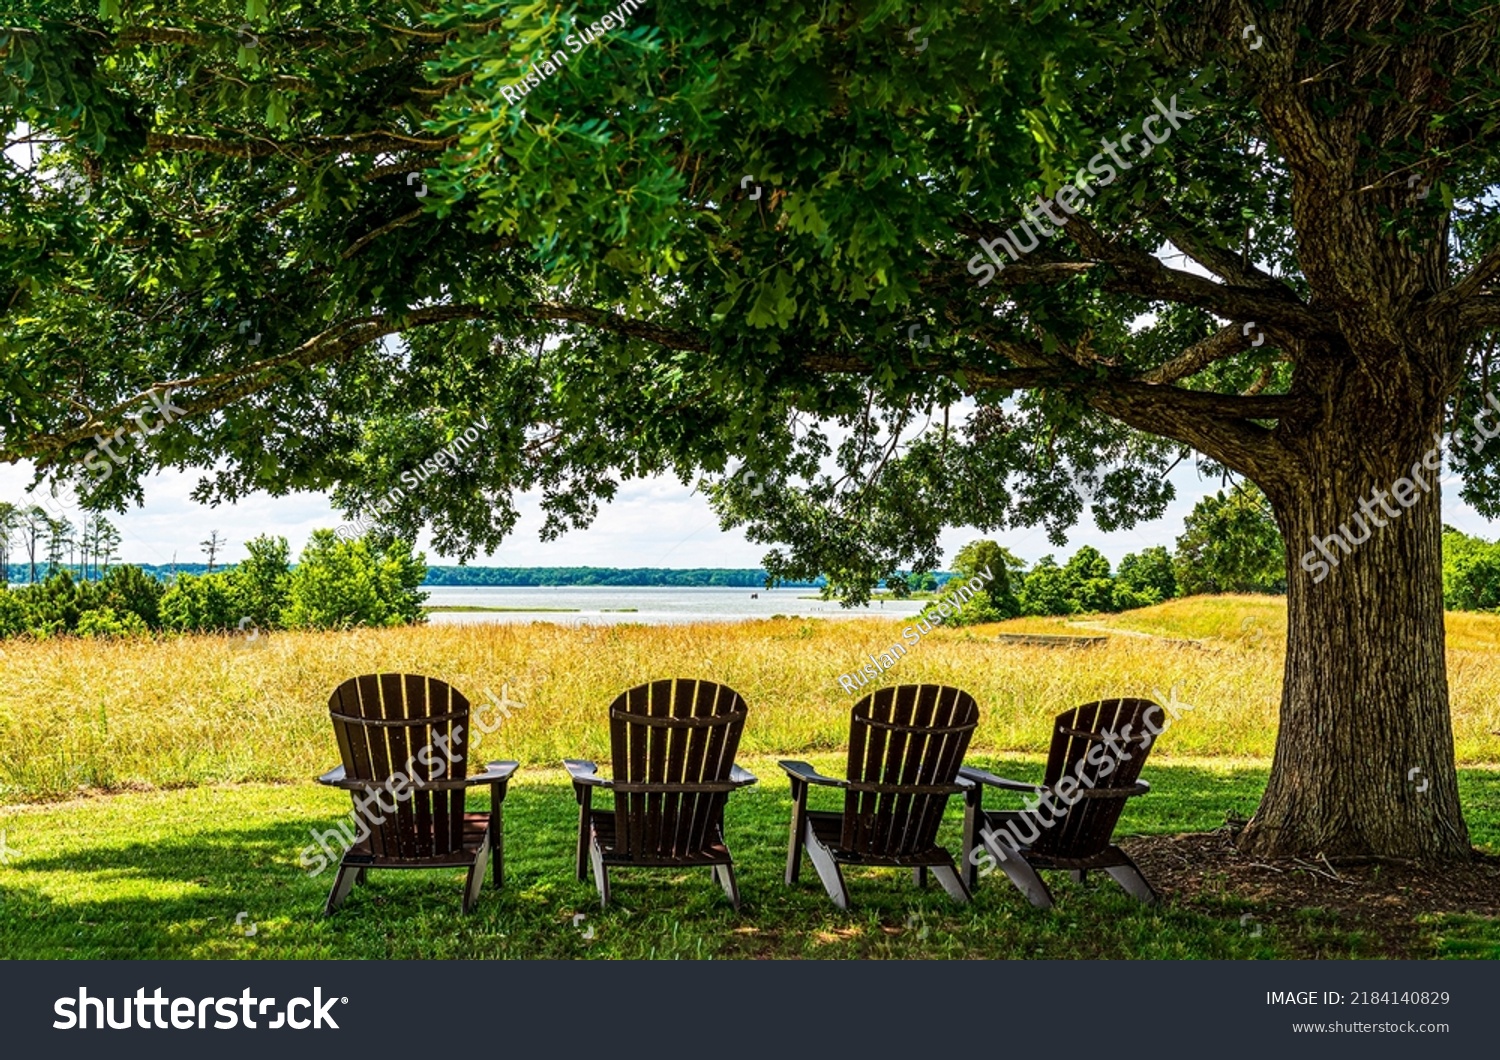 Four wooden chairs under an old tree. Wooden chairs under tree. Chairs under tree. Chairs under tree for relax #2184140829